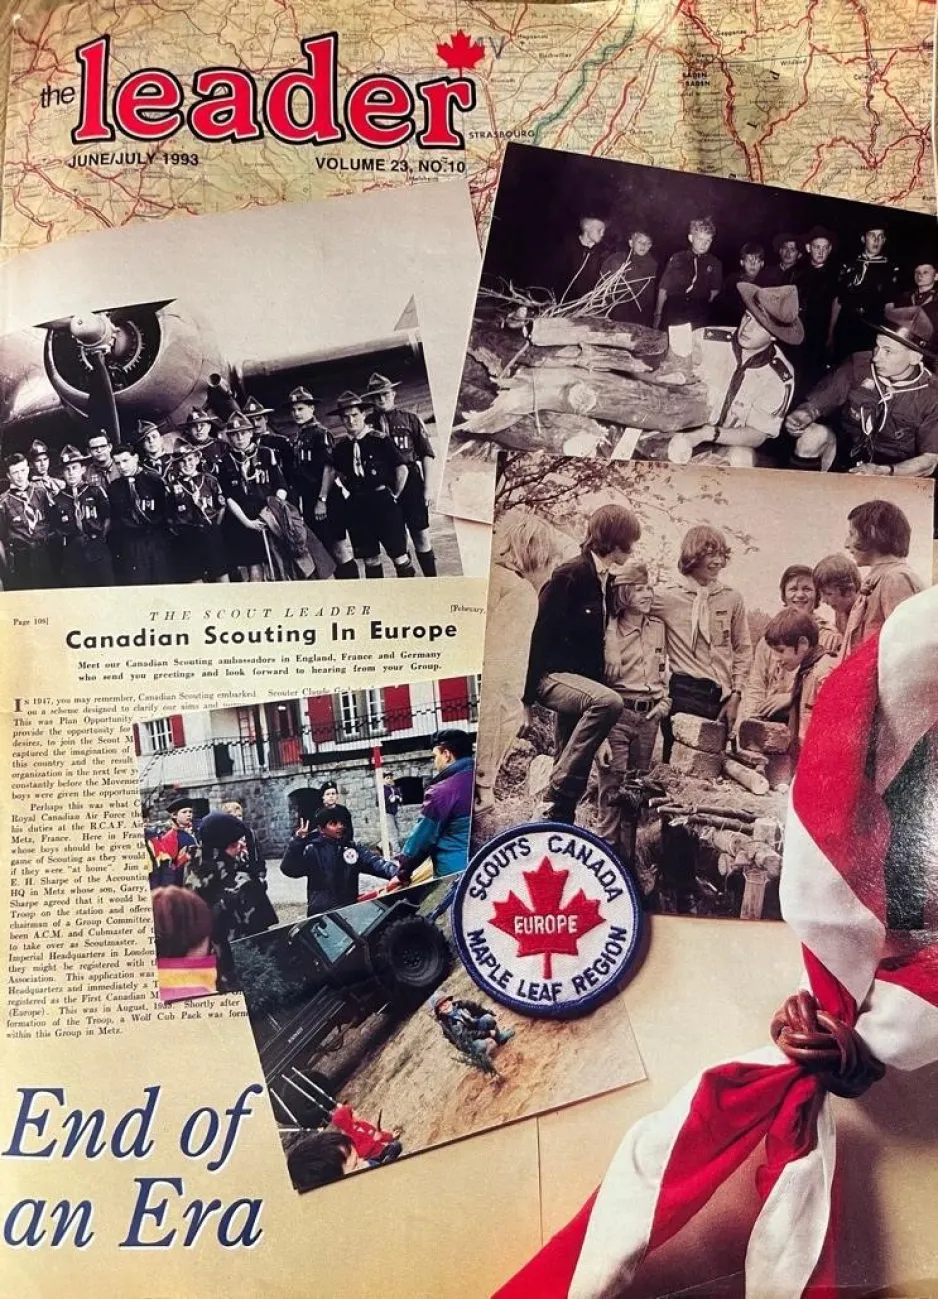 A close-up of a magazine titled "The Leader" showing a collage featuring images of Boy Scouts, a badge, a neckerchief, and a title reading "End of an Era."